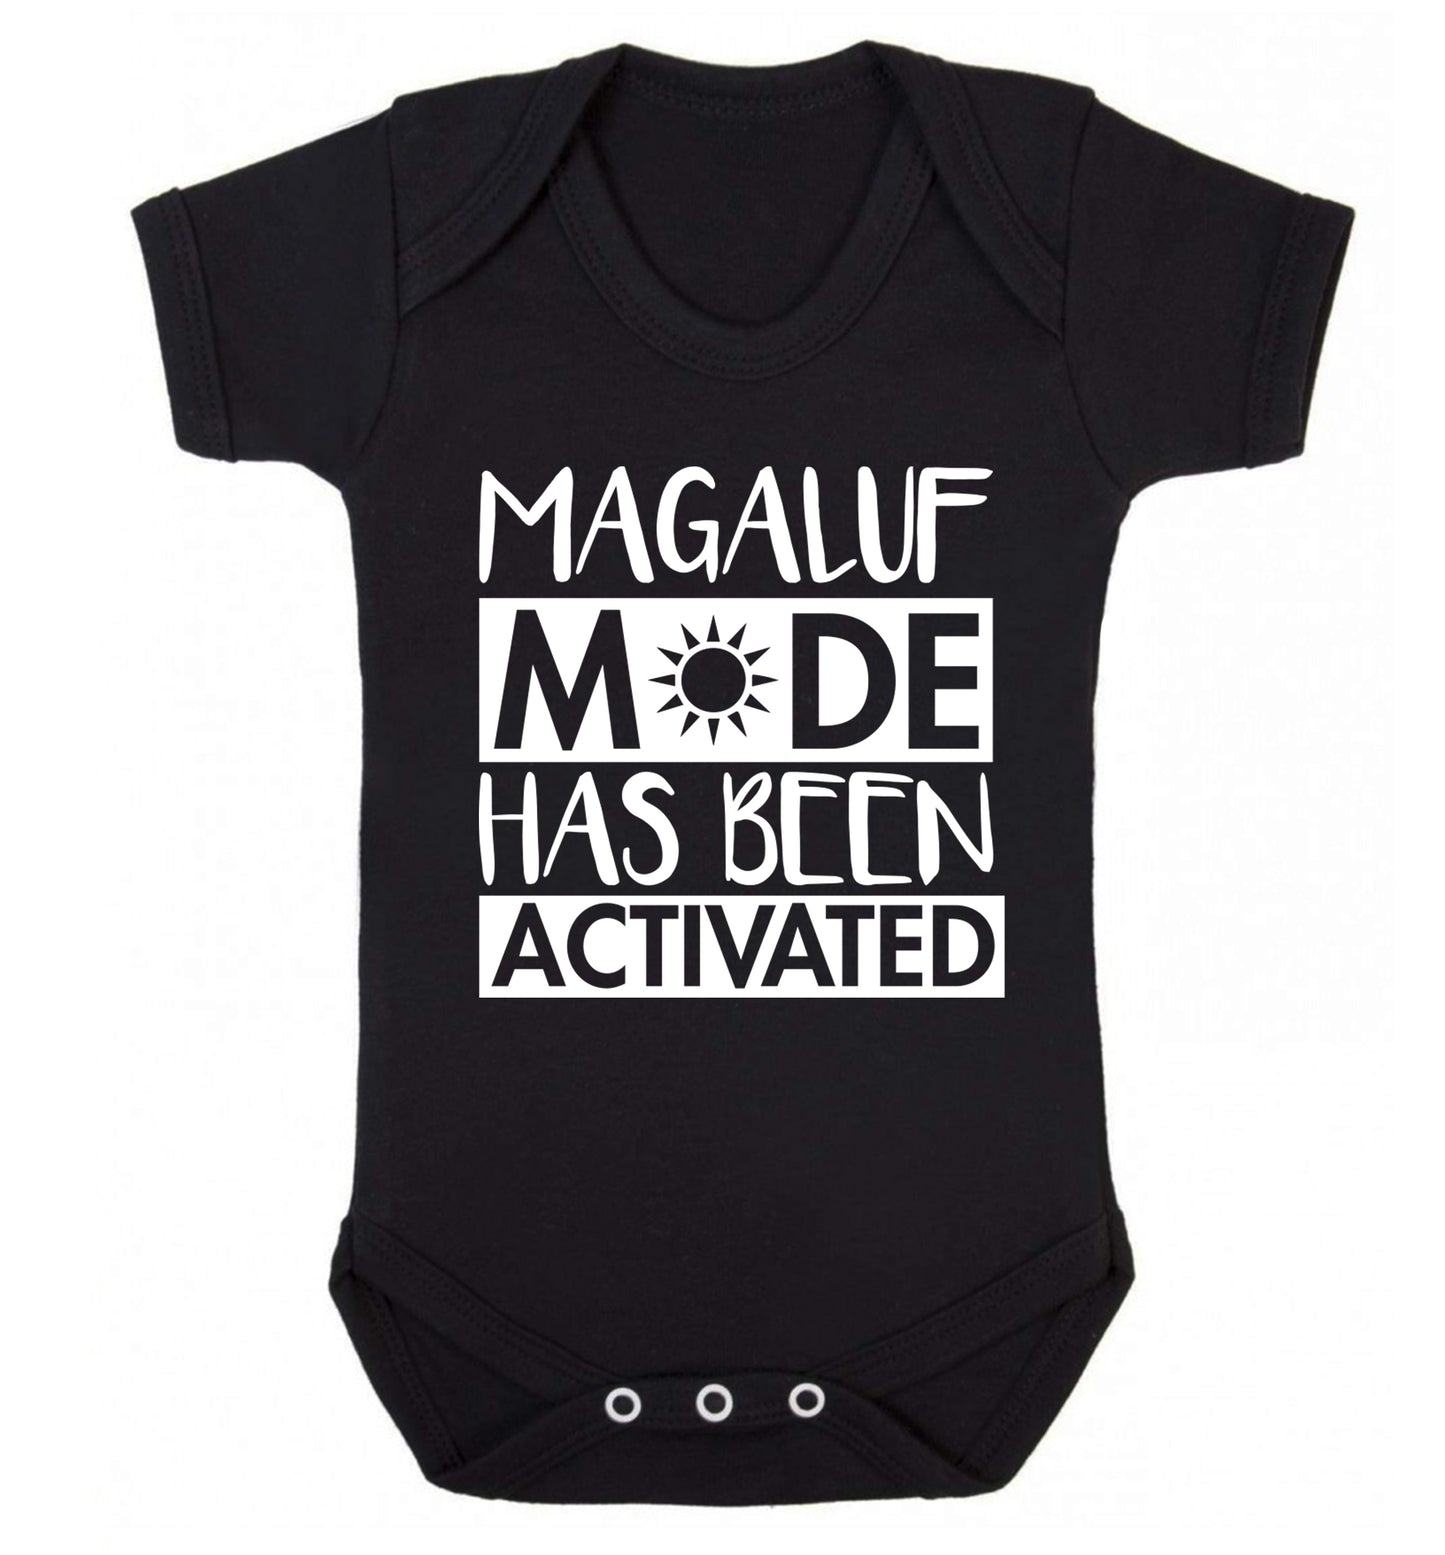 Magaluf mode has been activated Baby Vest black 18-24 months